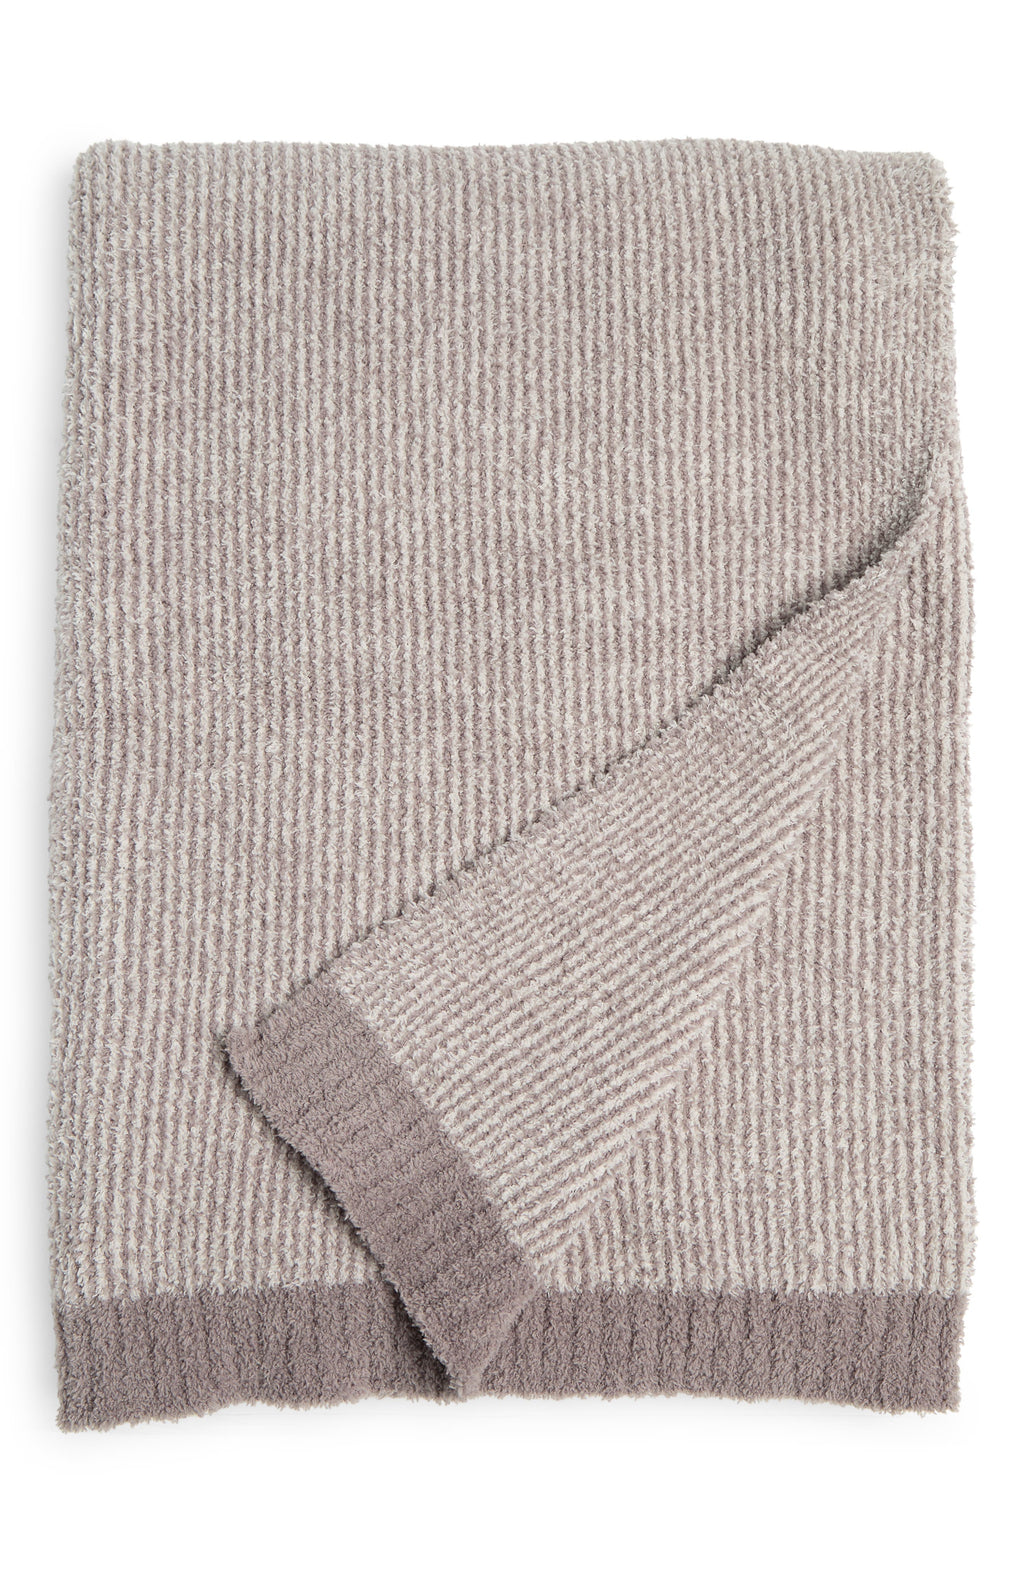 Barefoot Dreams<sup>®</sup> CozyChic<sup>™</sup> Microstripe Blanket, Main, color, BEACH ROCK-ALMOND